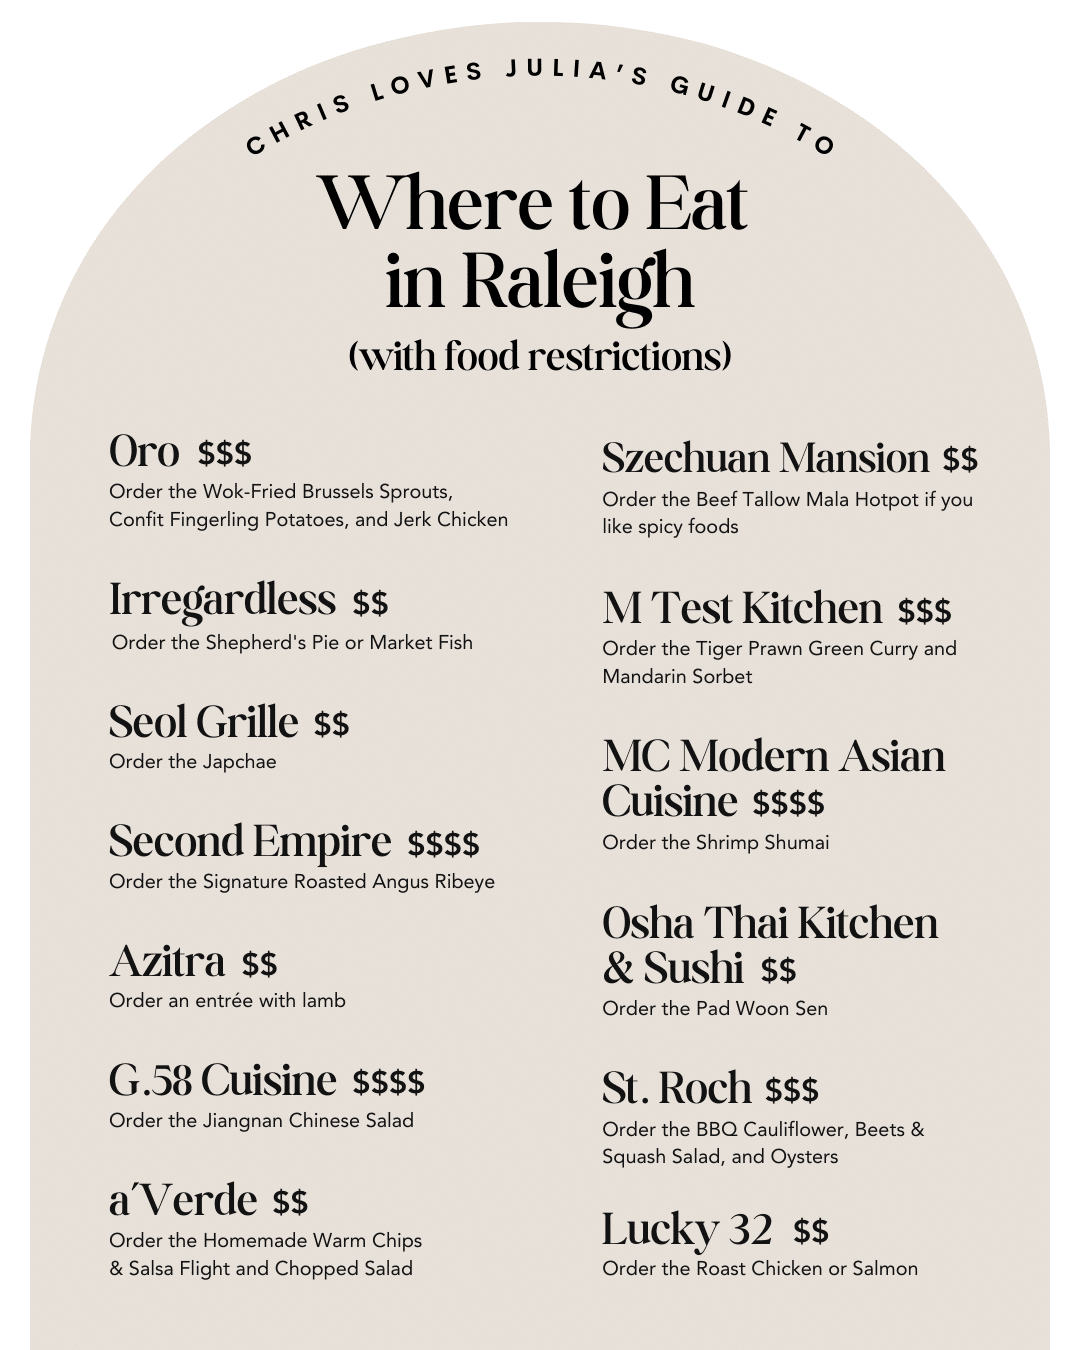 Chris Loves Julia's Guide to Where to Eat in Raleigh with Food Restrictions 